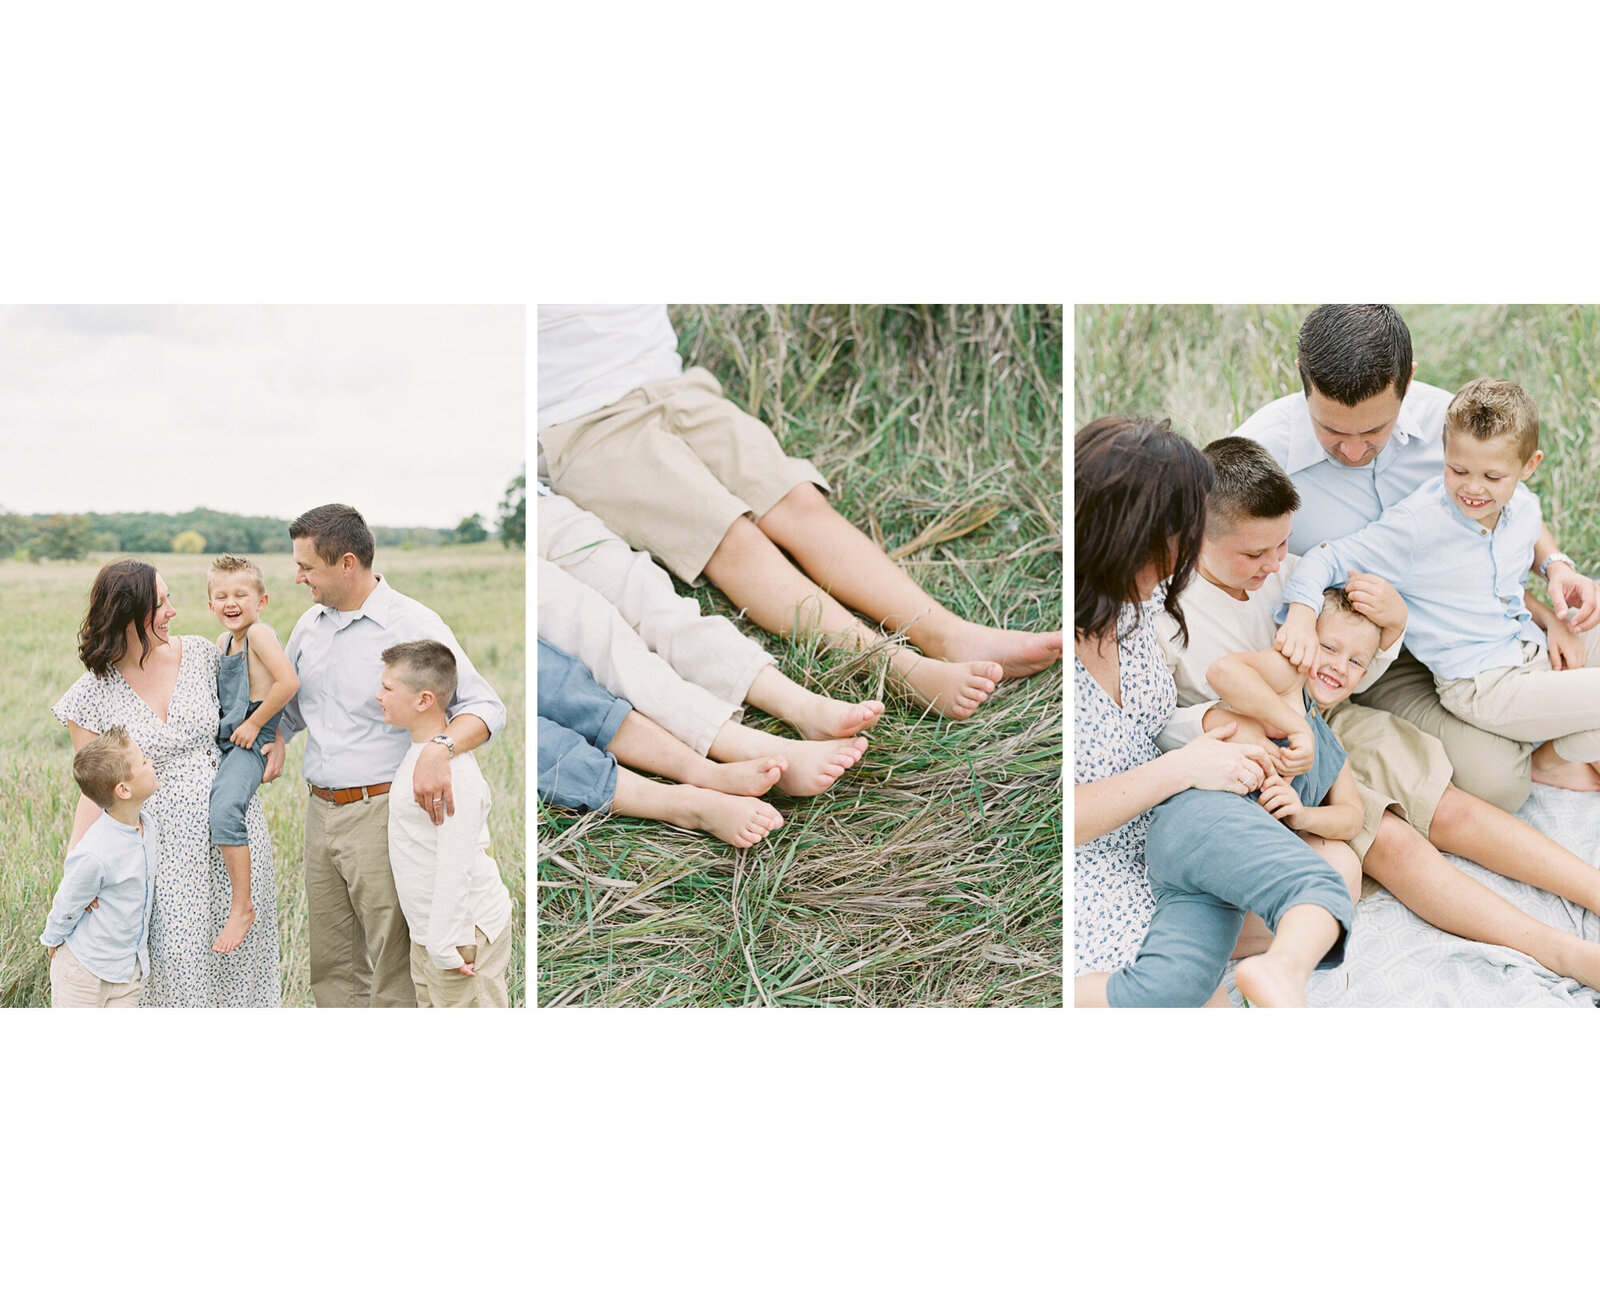 family in high end clothing during summer family session in a grassy field by madison wi photographer, Talia Laird Photography